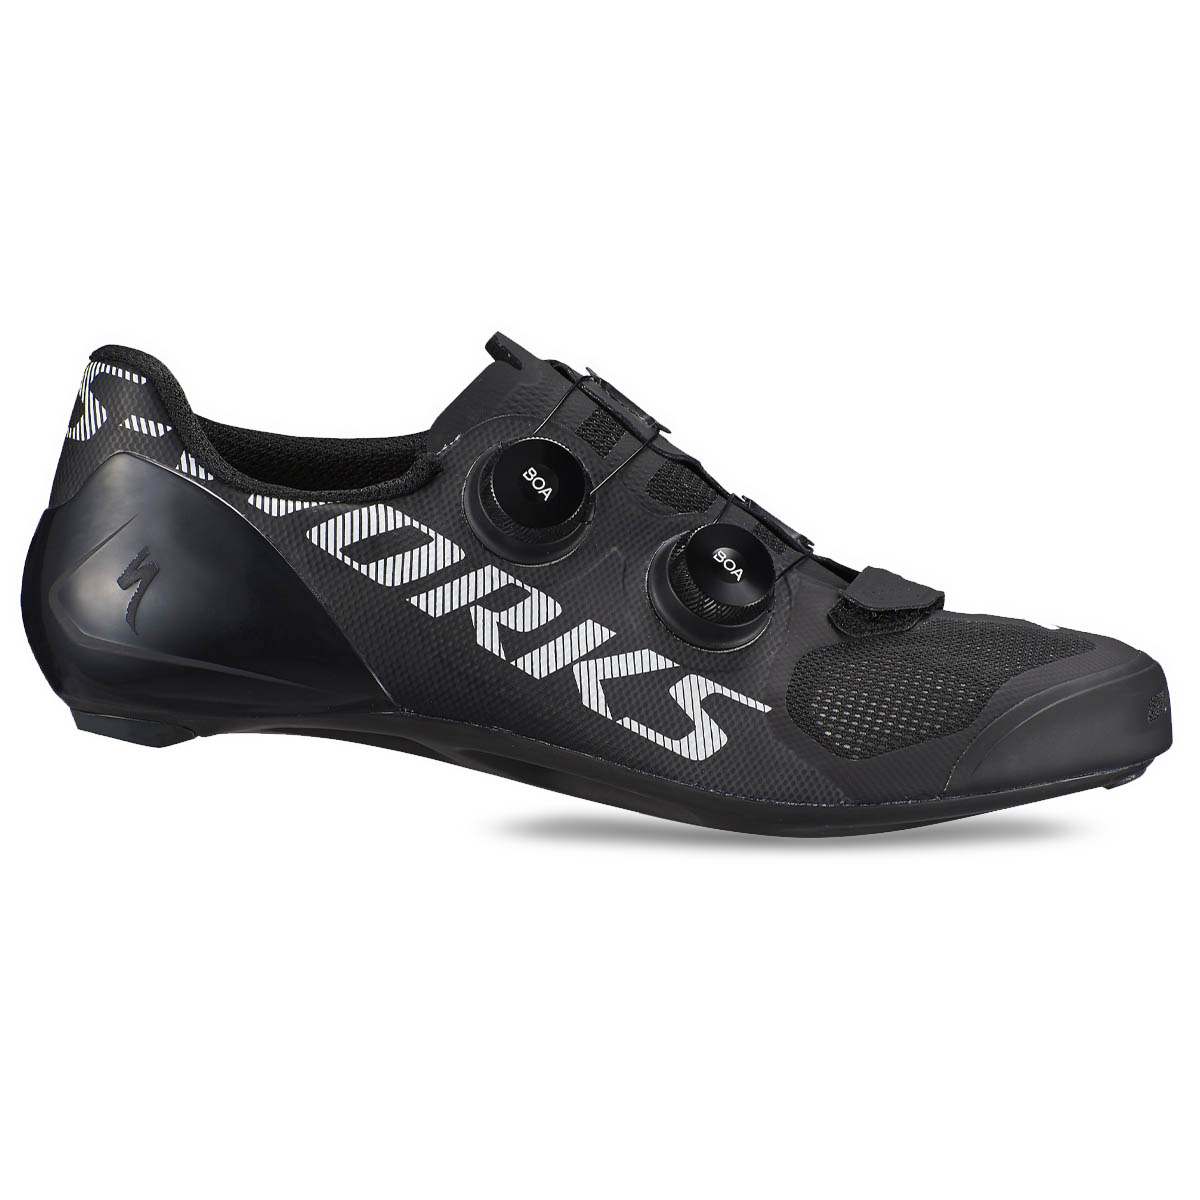 CHAUSSURES SPECIALIZED S-WORKS 7 VENT